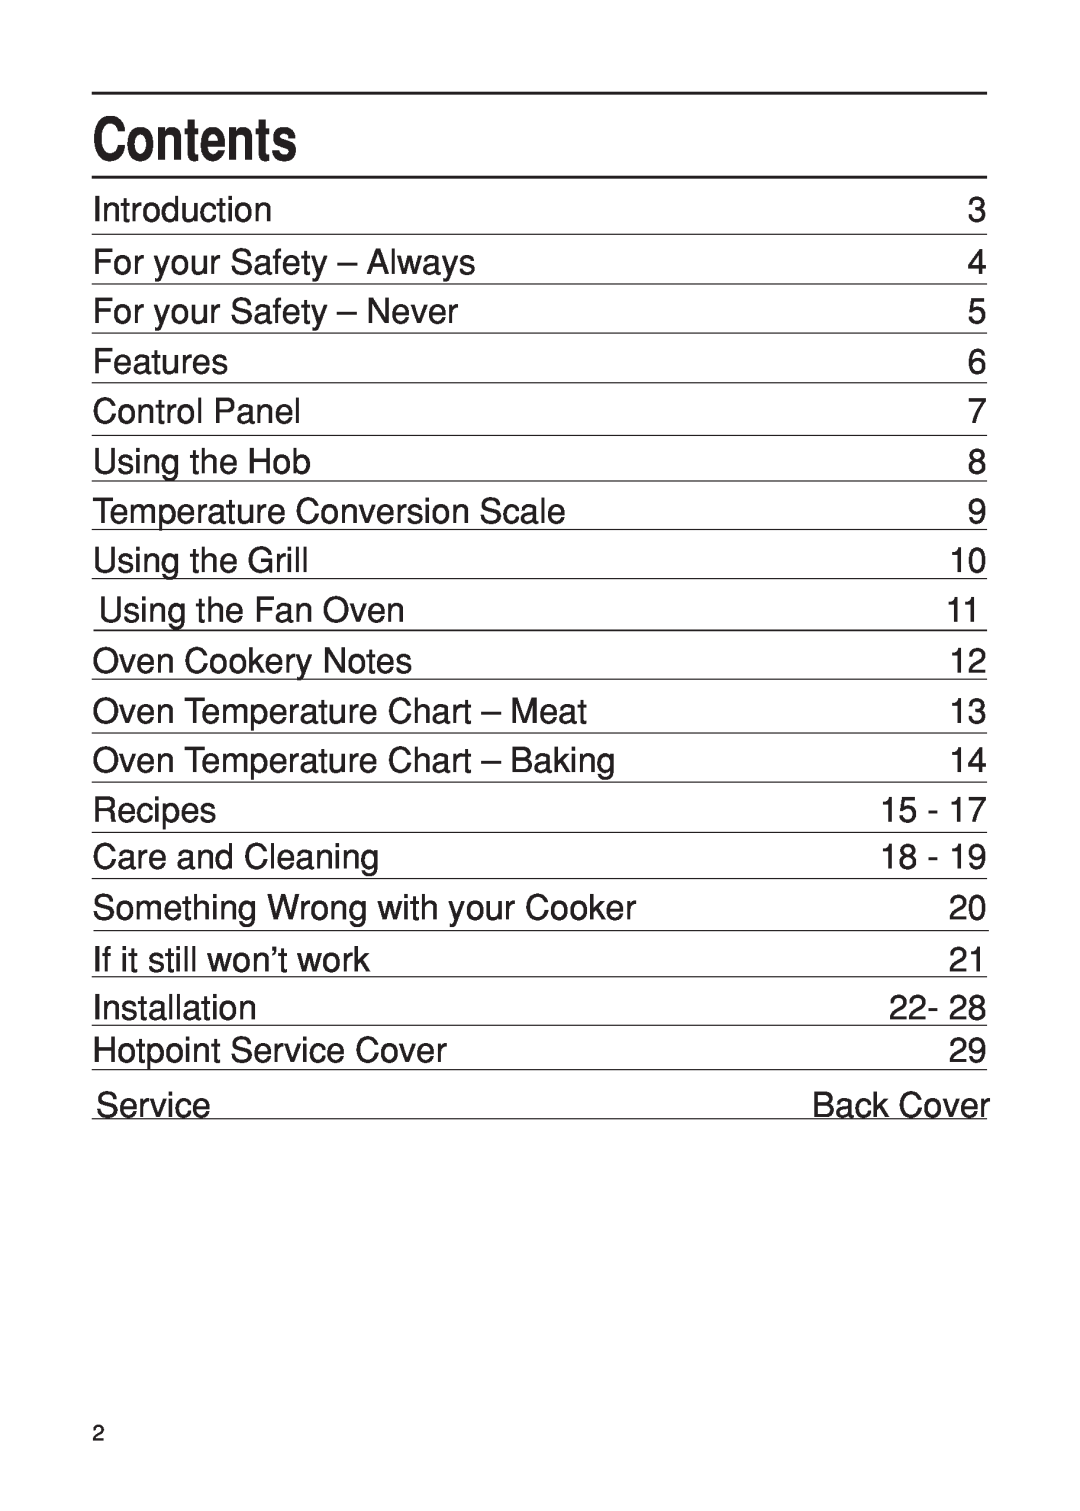 Hotpoint EG21 manual Contents 